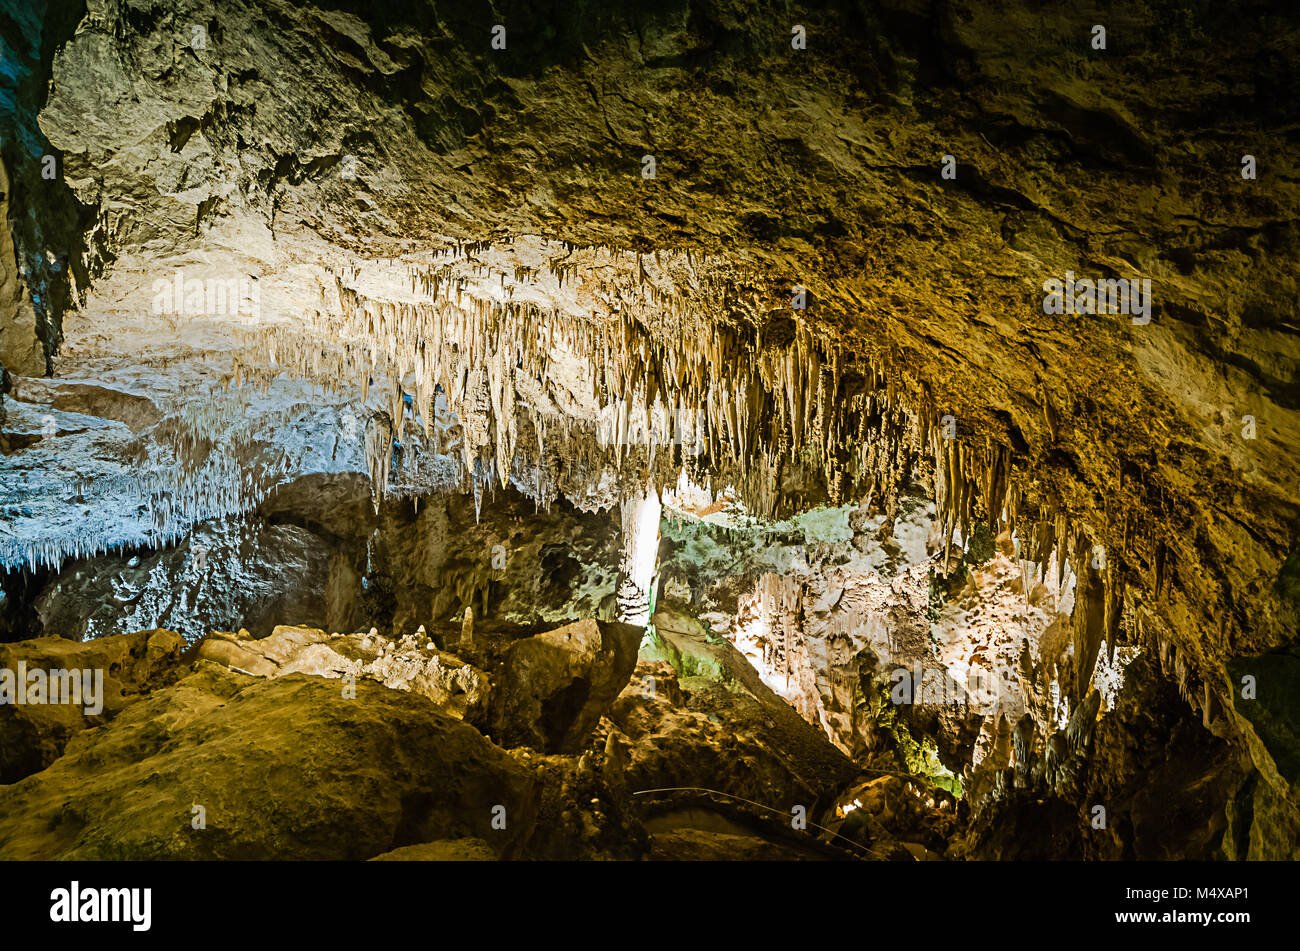 The Green Lake Room is one of many highly decorated scenic chambers within the complex of 84 major caves at Carlsbad Caverns National Park. Stock Photo